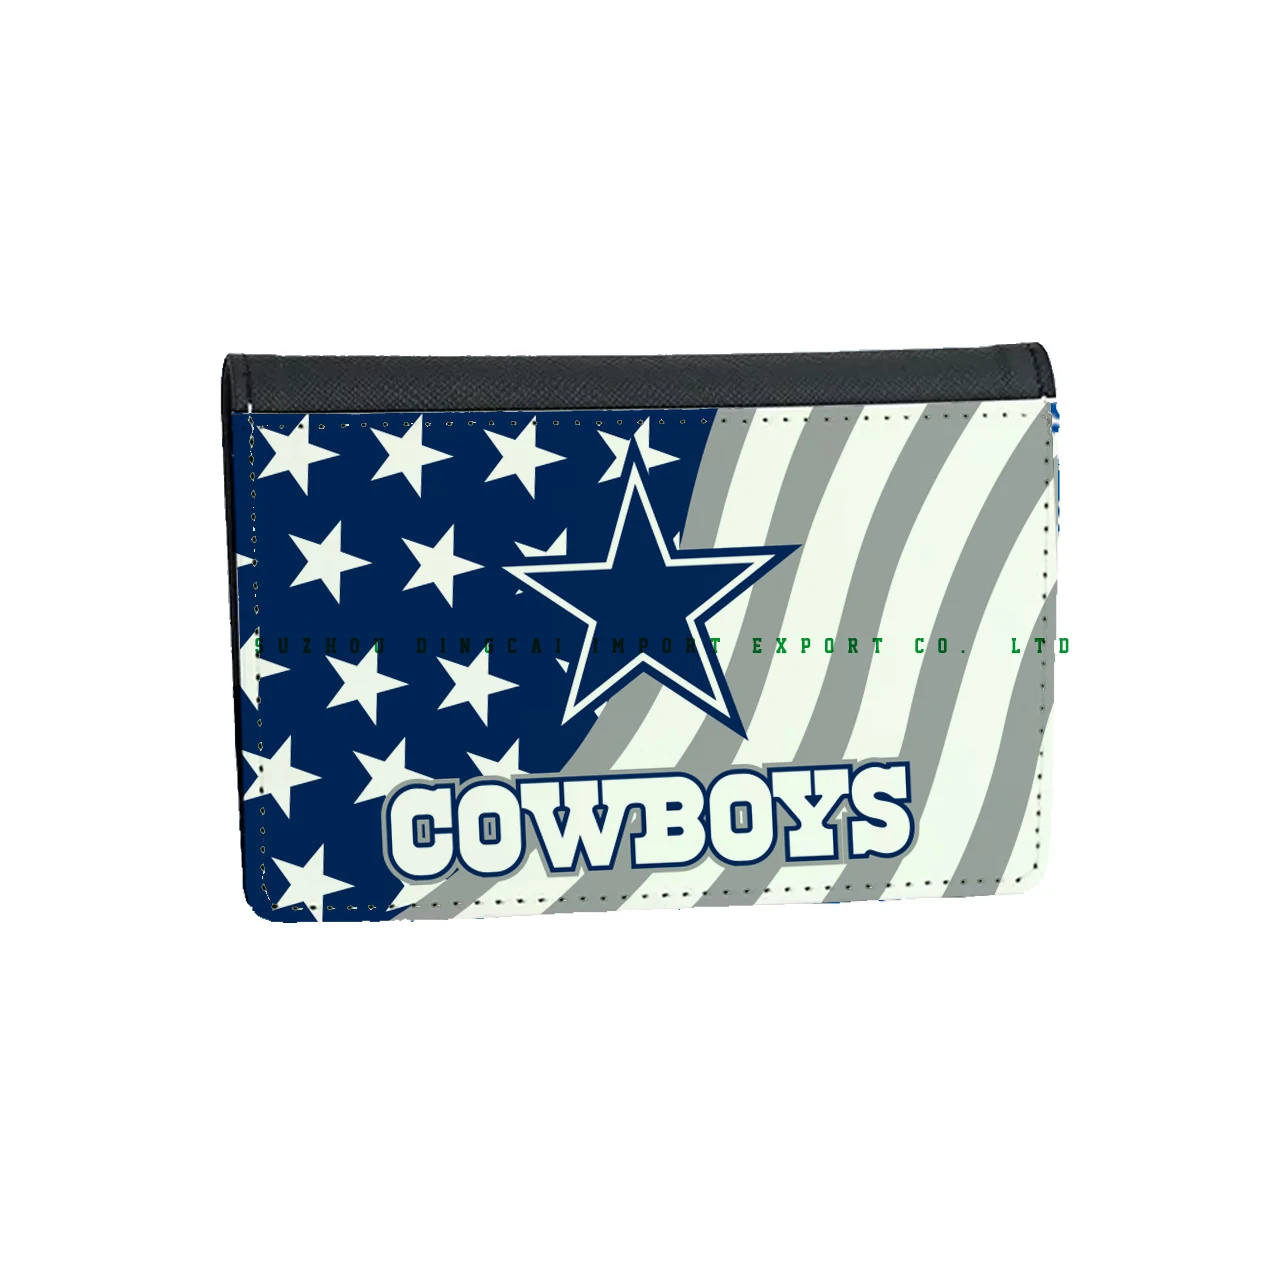 Custom 14.6X9cm Passport Cover  PU Leather Dallas Cowboys  Passport Holder Cover Case with Card Slot (1600697396424)